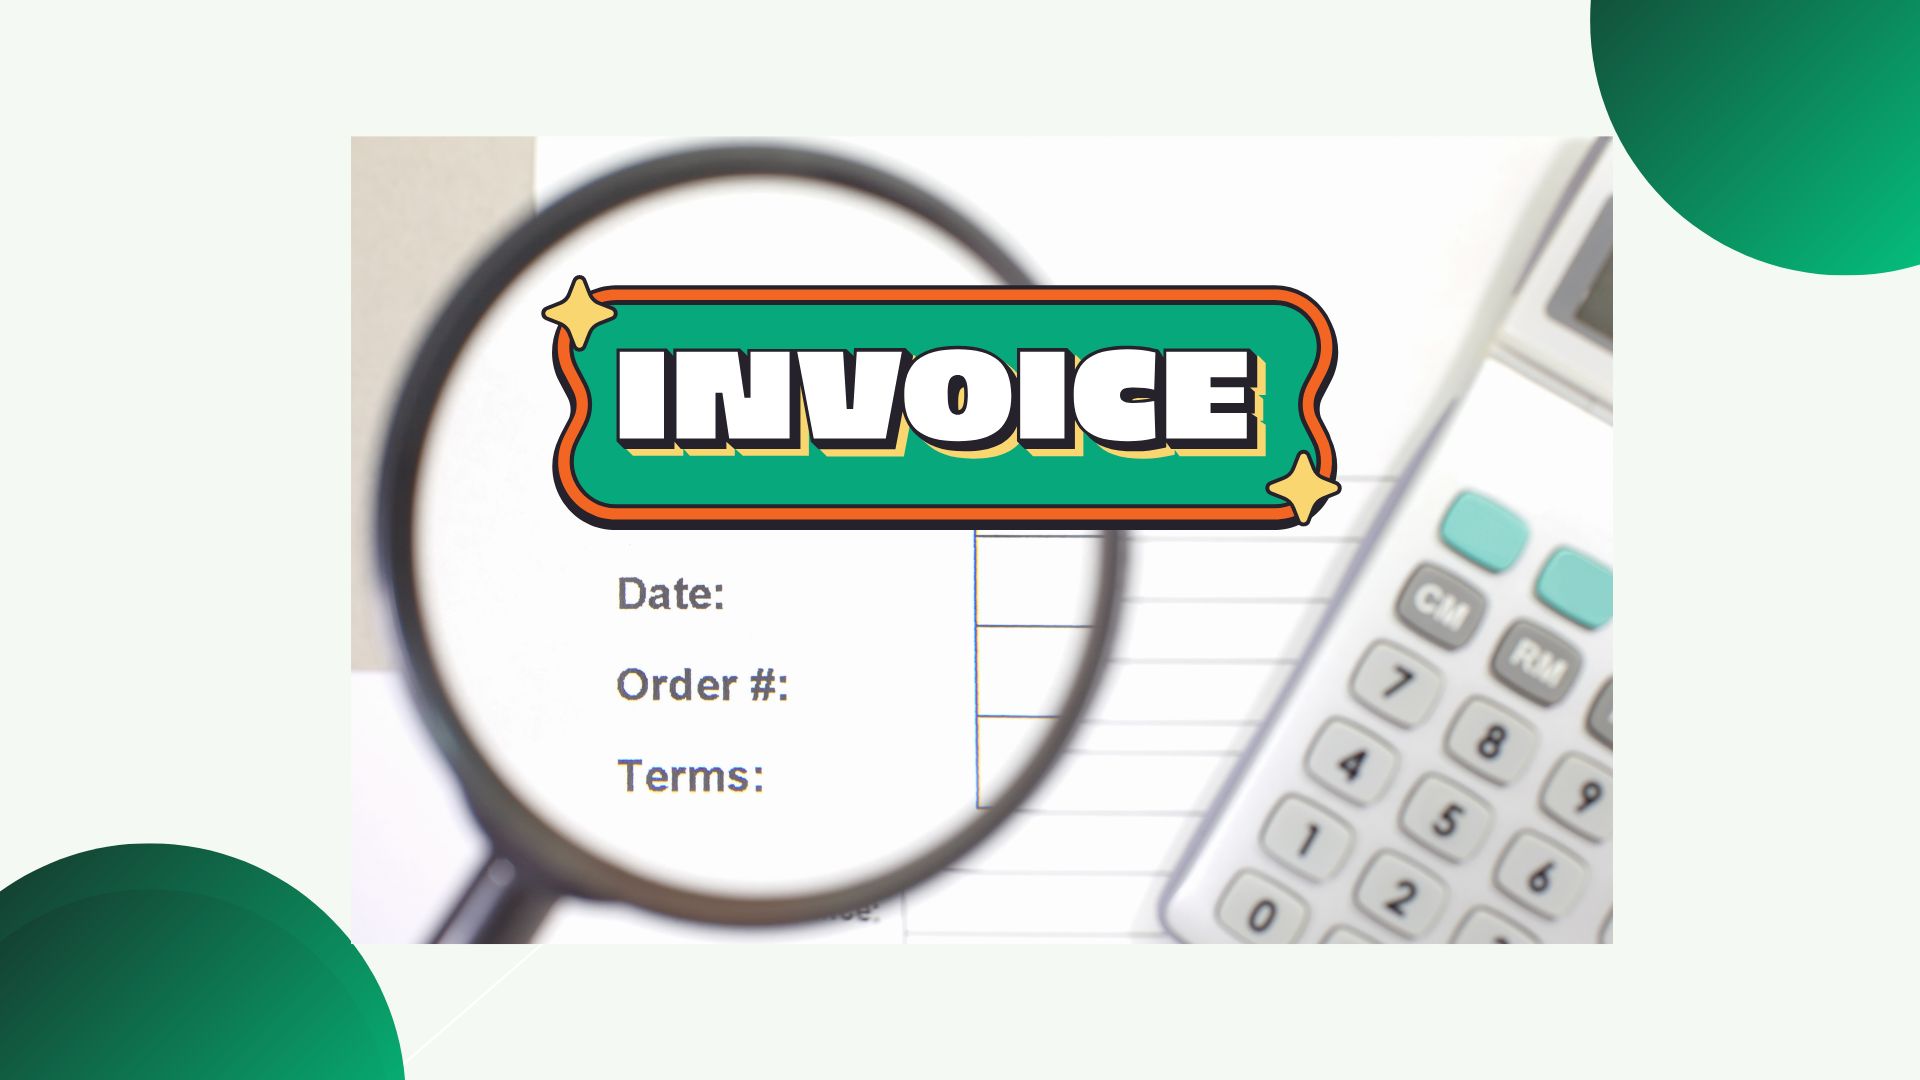 commercial invoice for export template